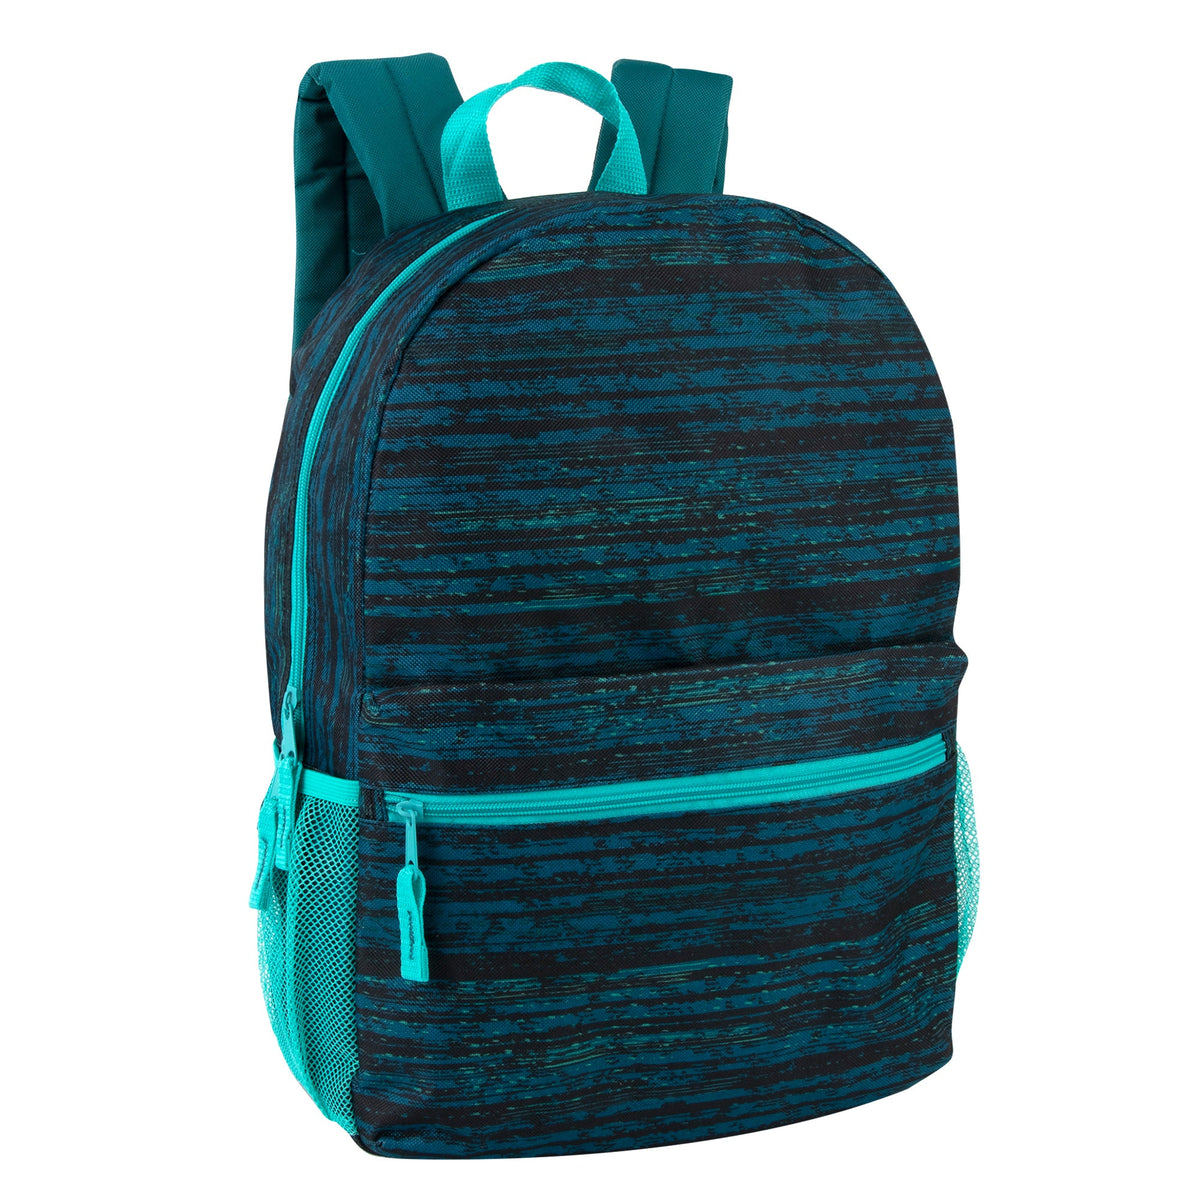 17 Inch Printed Backpacks - Boys ( 1 Case=24Pcs) 5.95$/PC